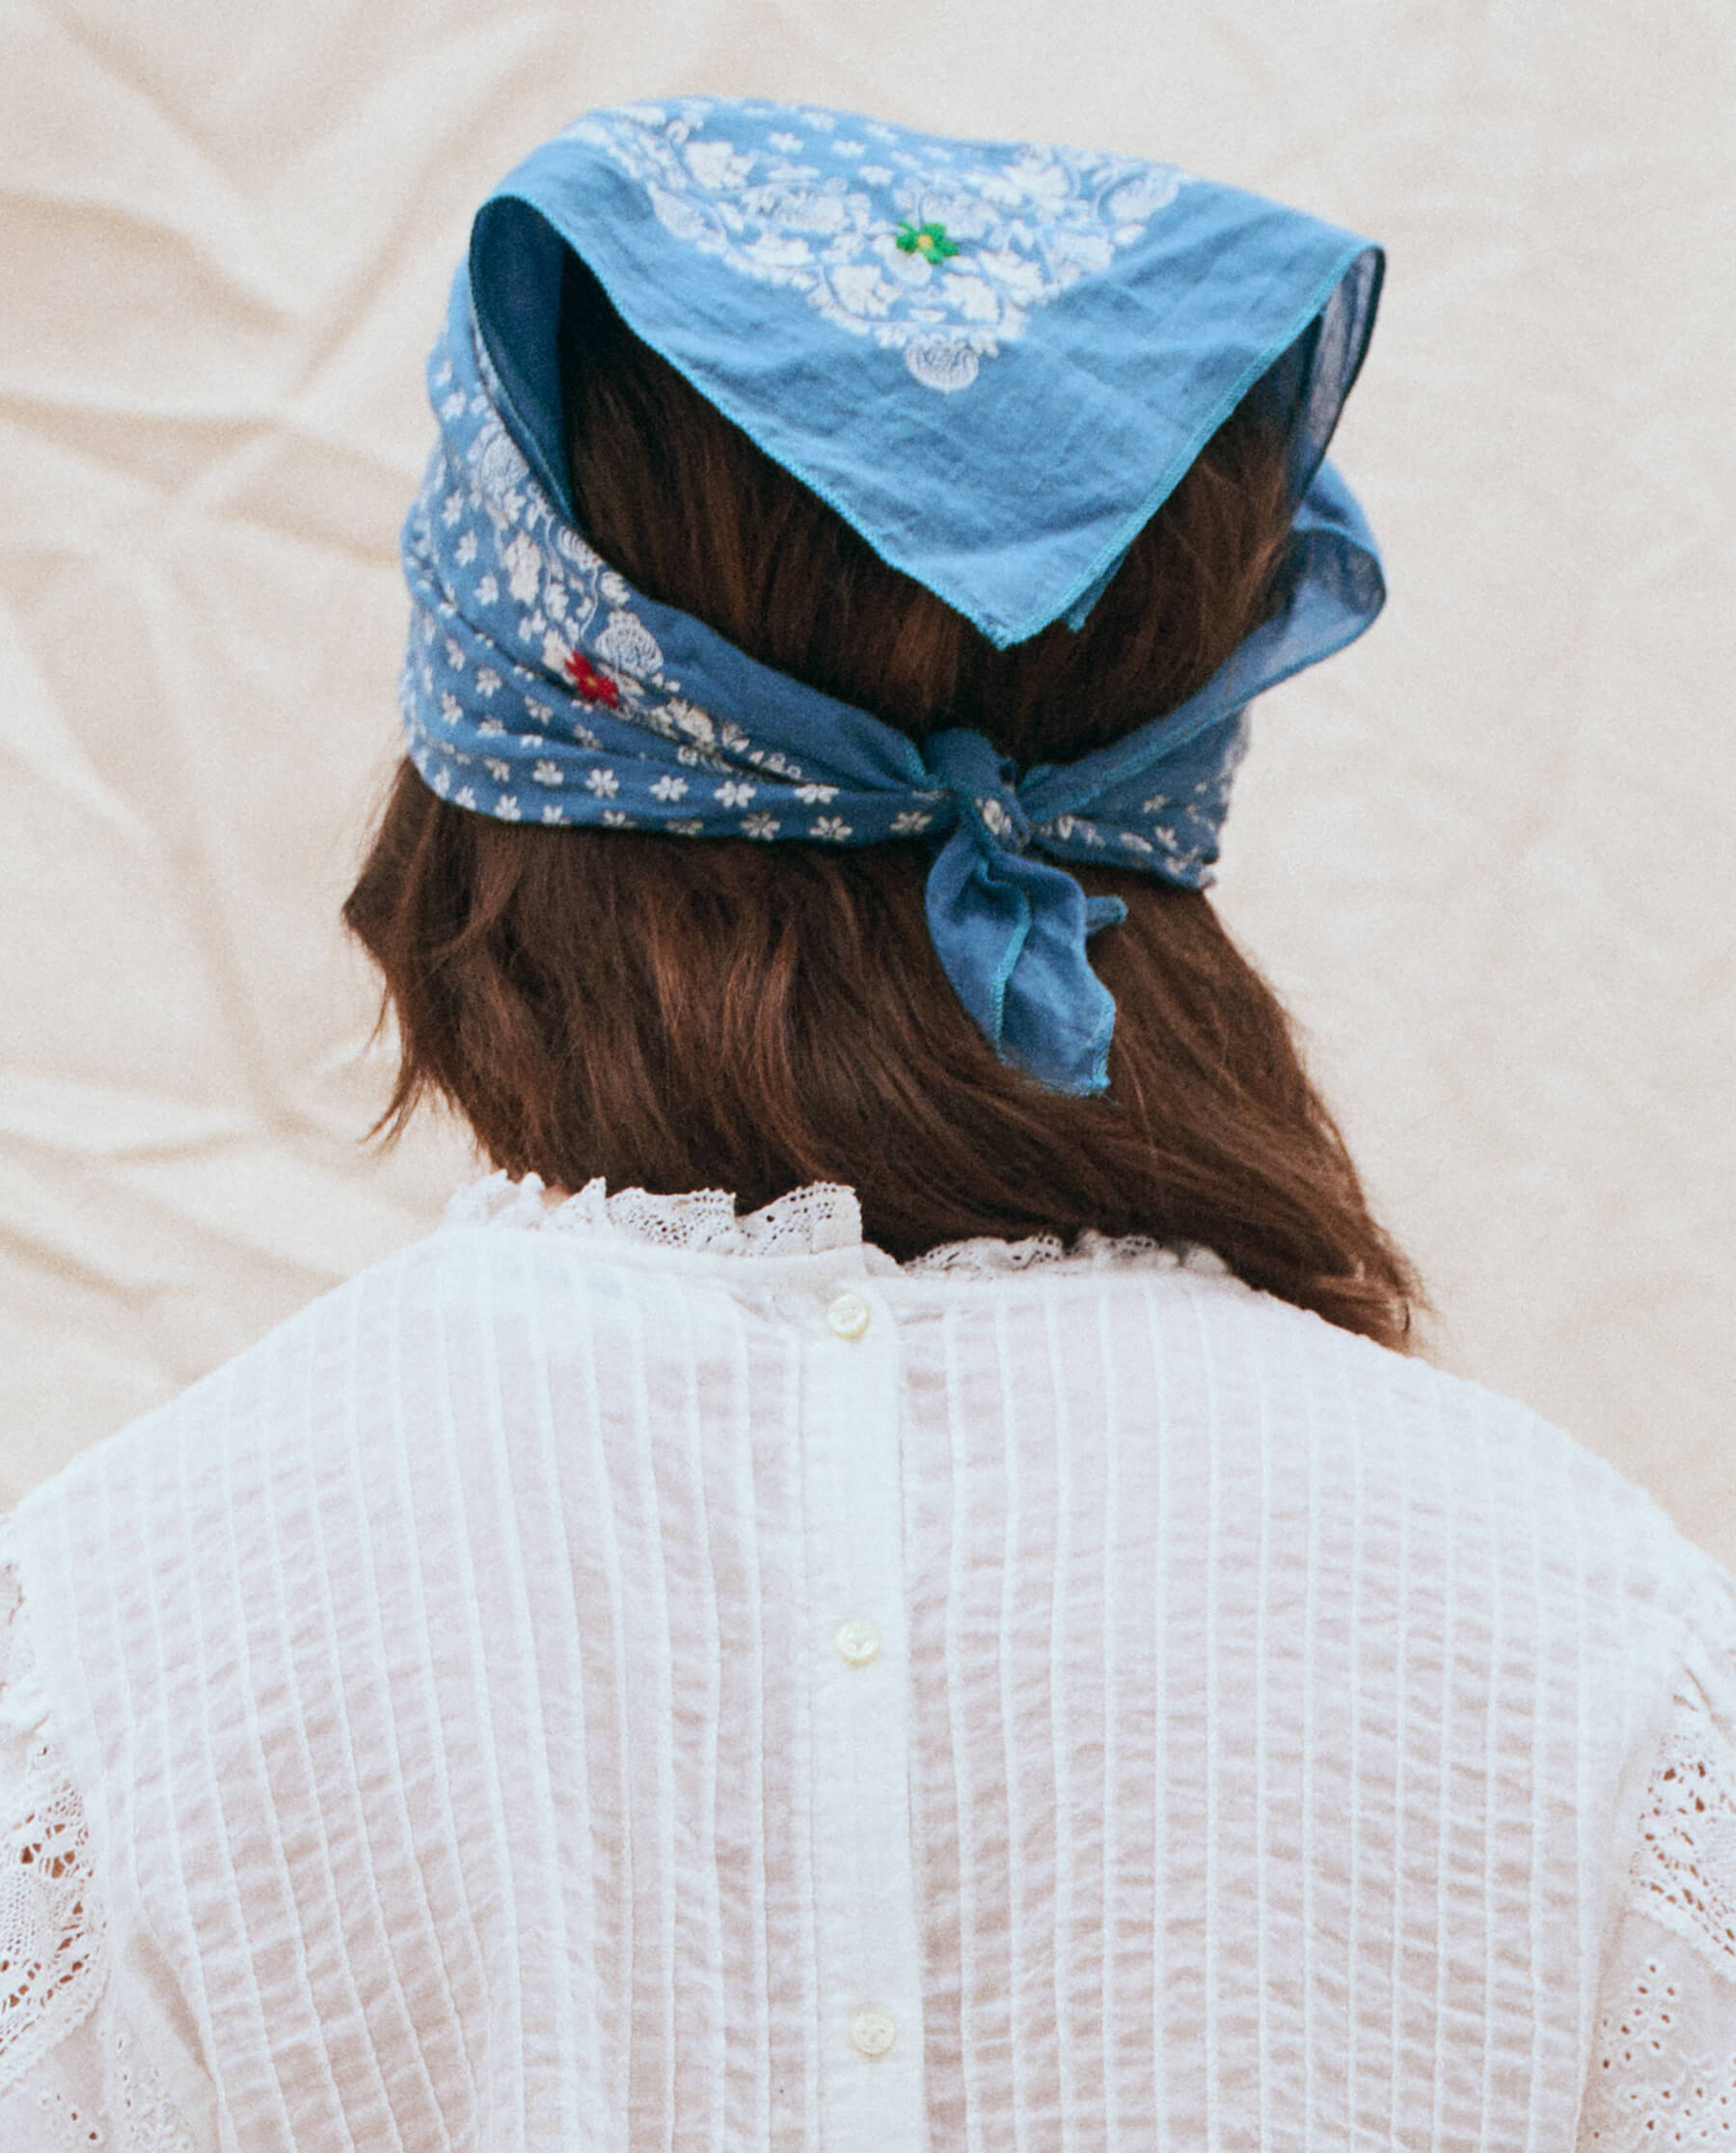 The Bandana with Embroidered Daisies. -- Dusty Blue with Multi